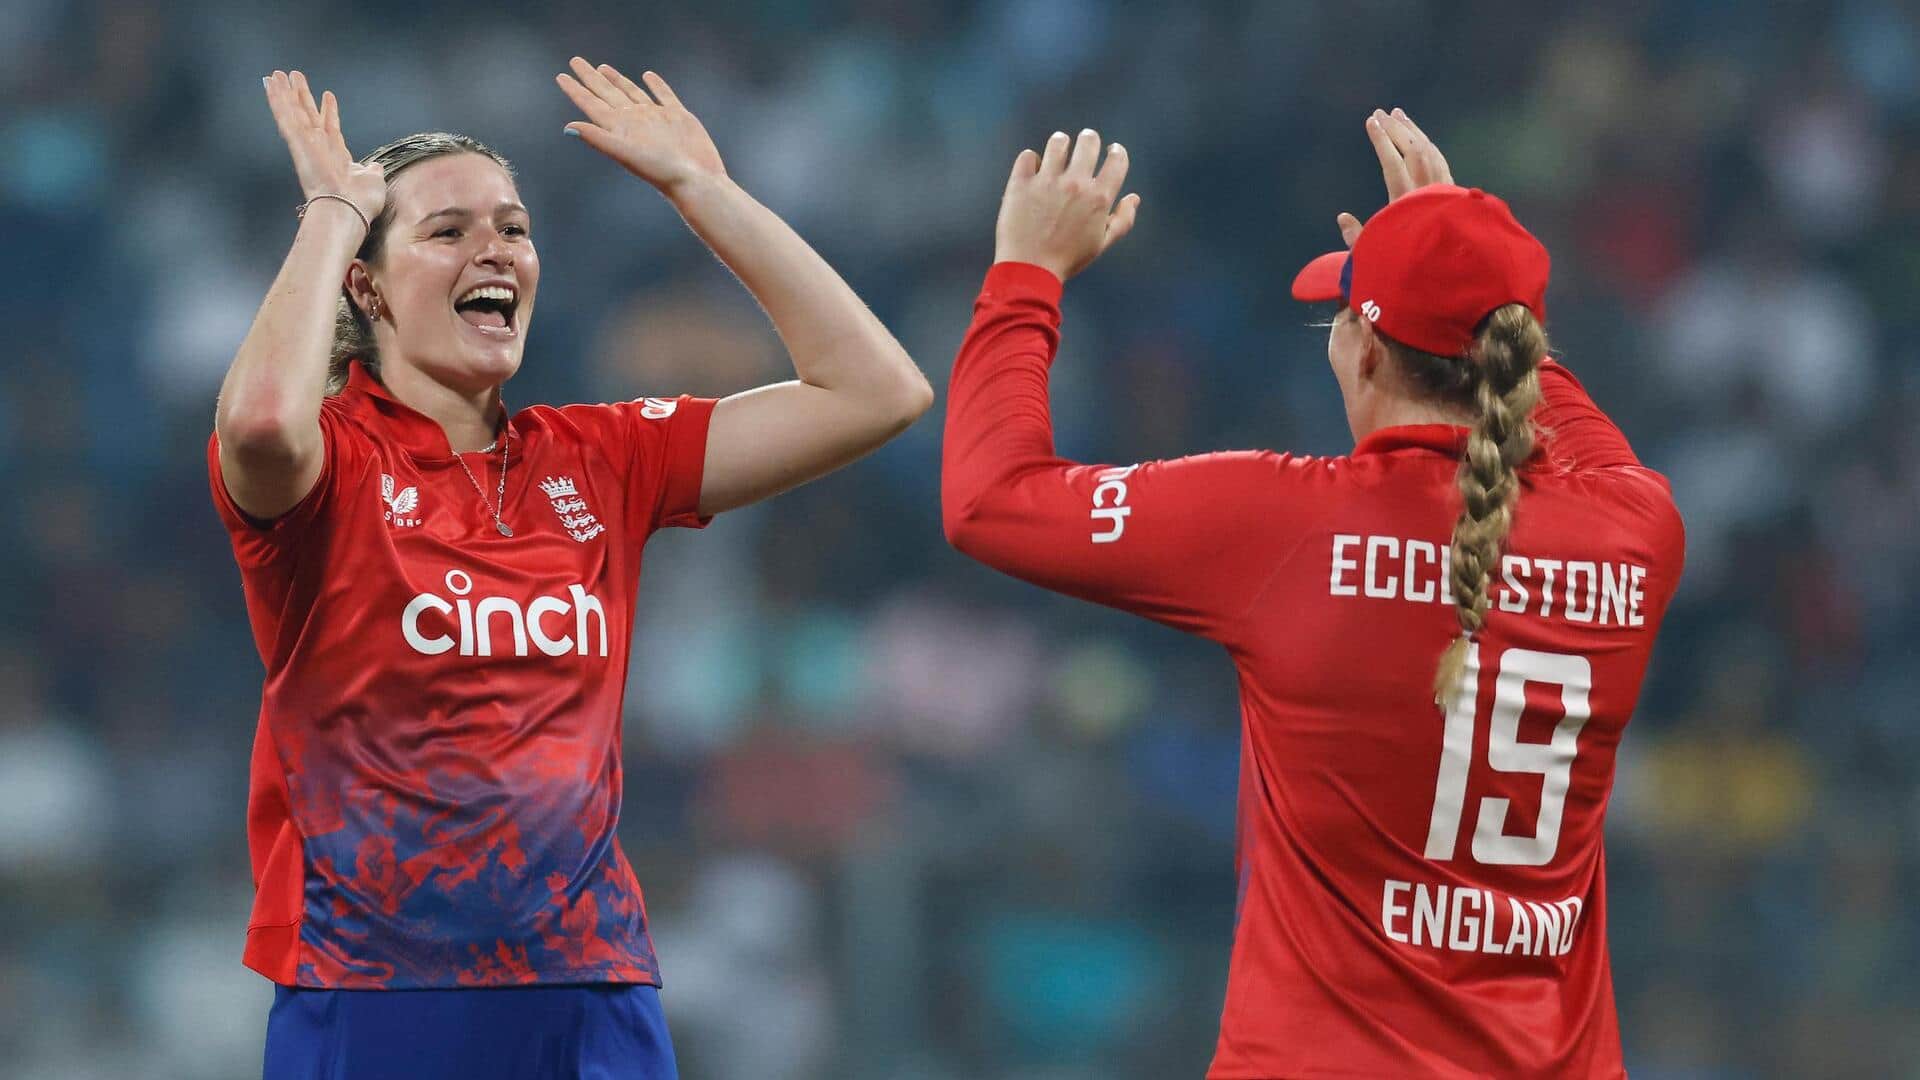 England beat India in 2nd WT20I, seal series: Key stats